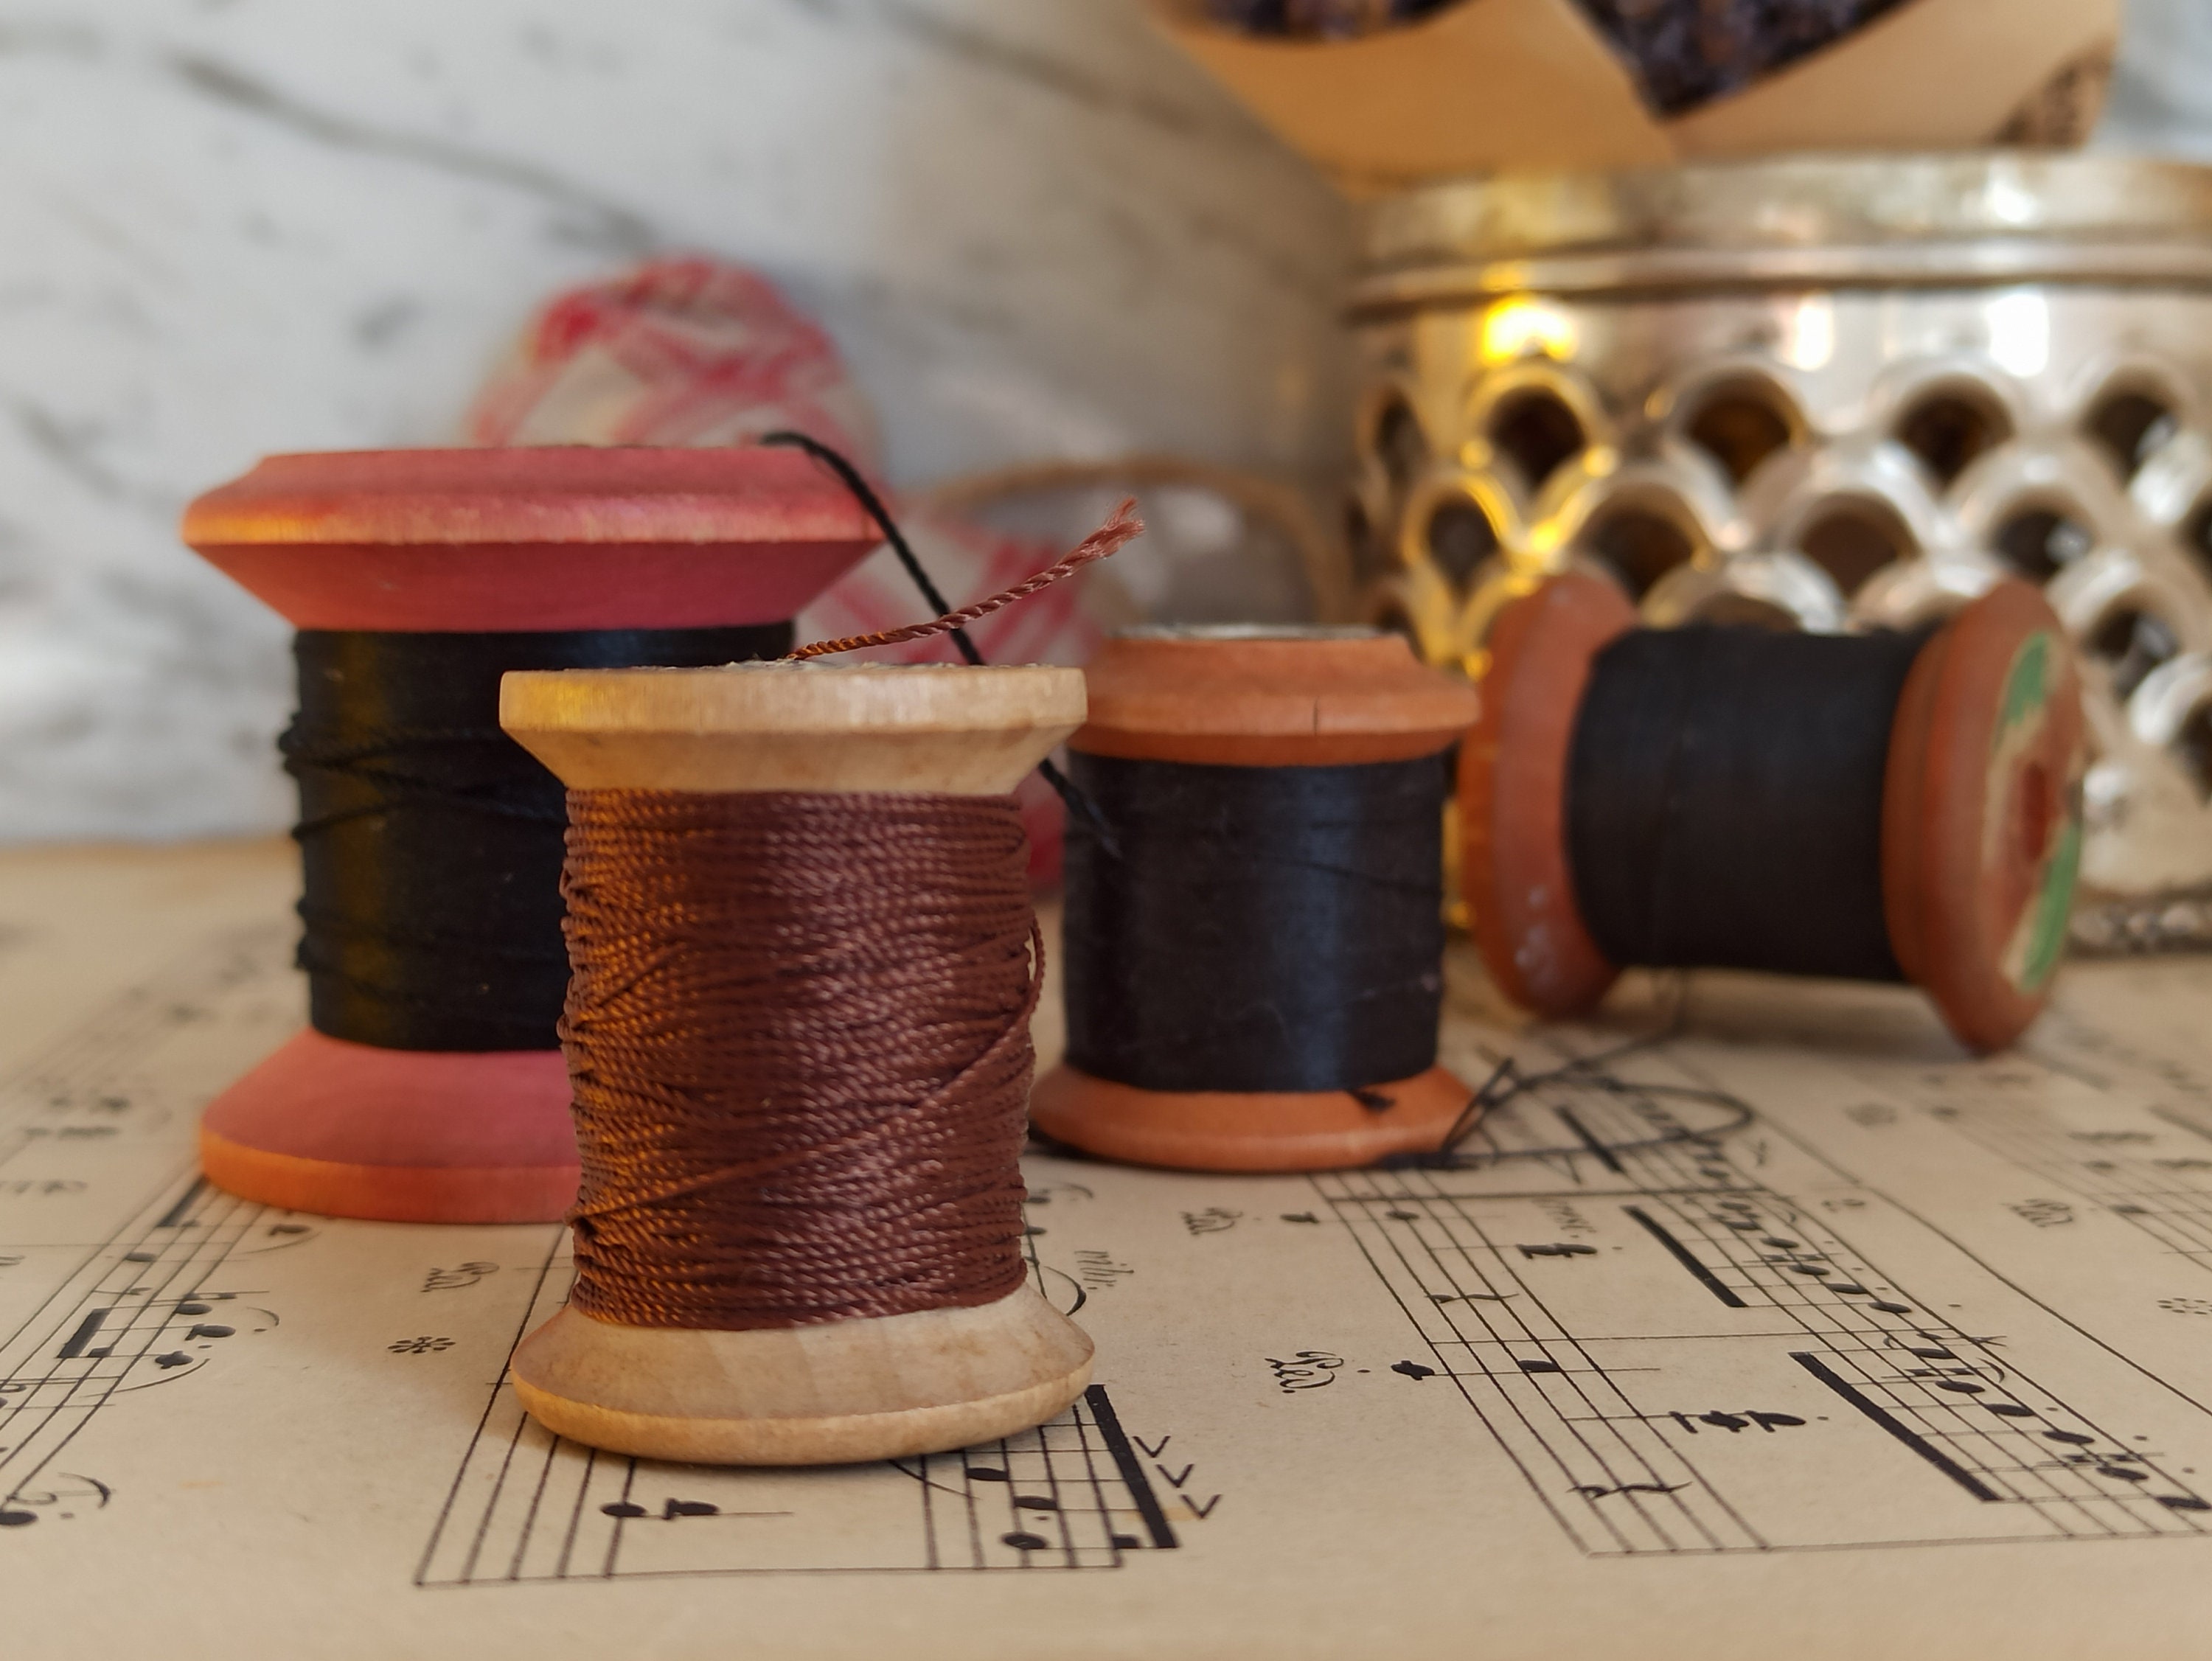 4 Wooden Spools Ancient, Black Thread on a Wooden Spool Sewing Kit